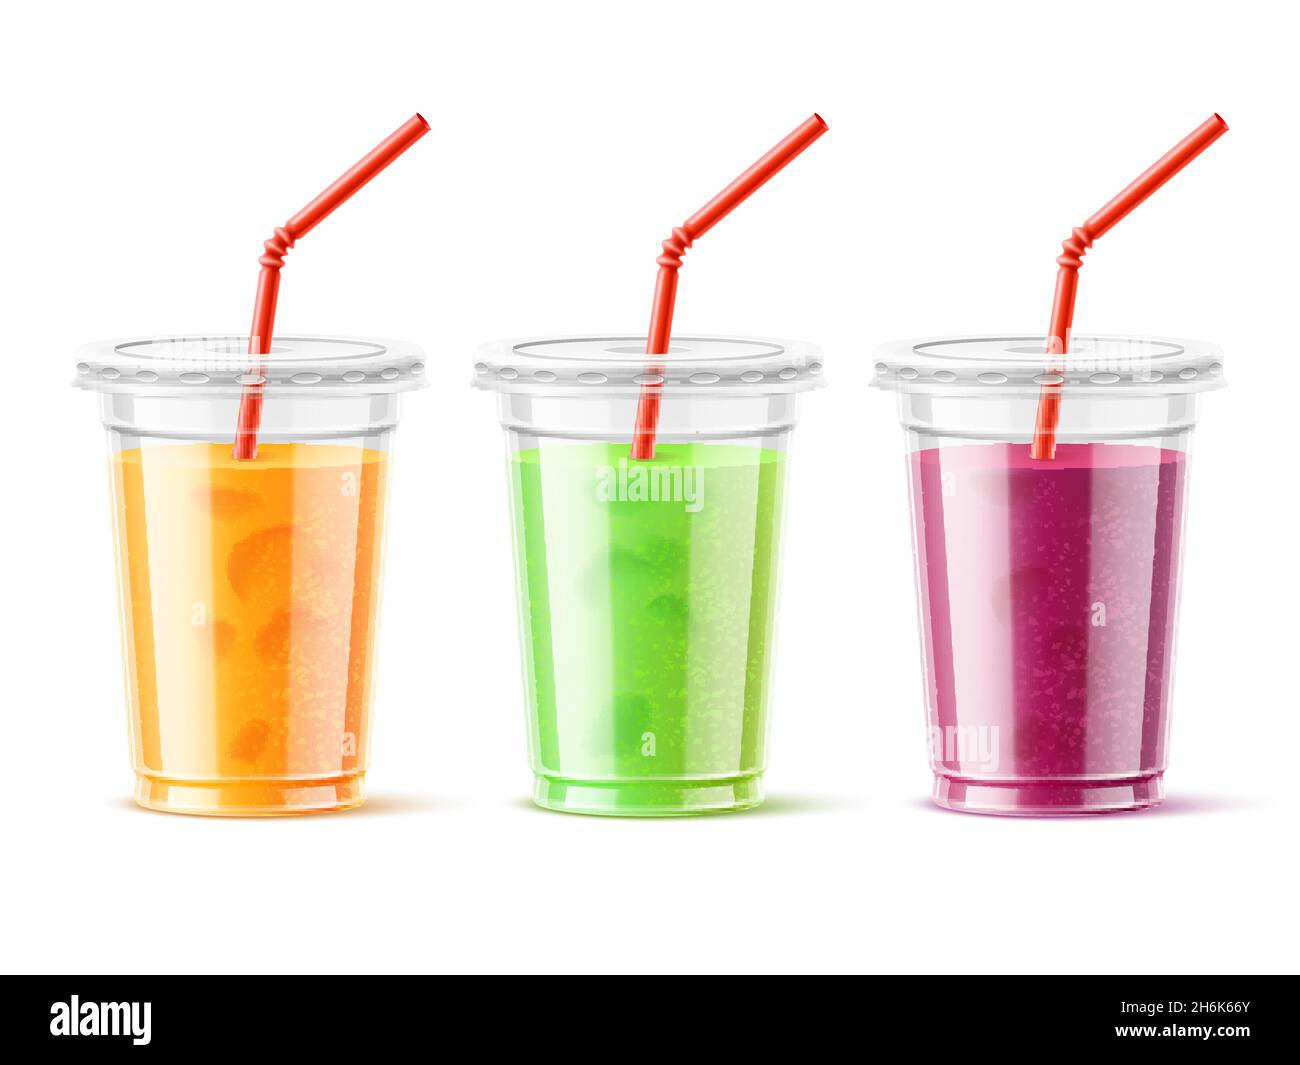 https://c8.alamy.com/comp/2H6K66Y/plastic-cup-juice-realistic-color-fruits-smoothies-in-takeaway-transparent-glasses-with-lids-and-drinking-tubes-healthy-food-vector-set-2H6K66Y.jpg